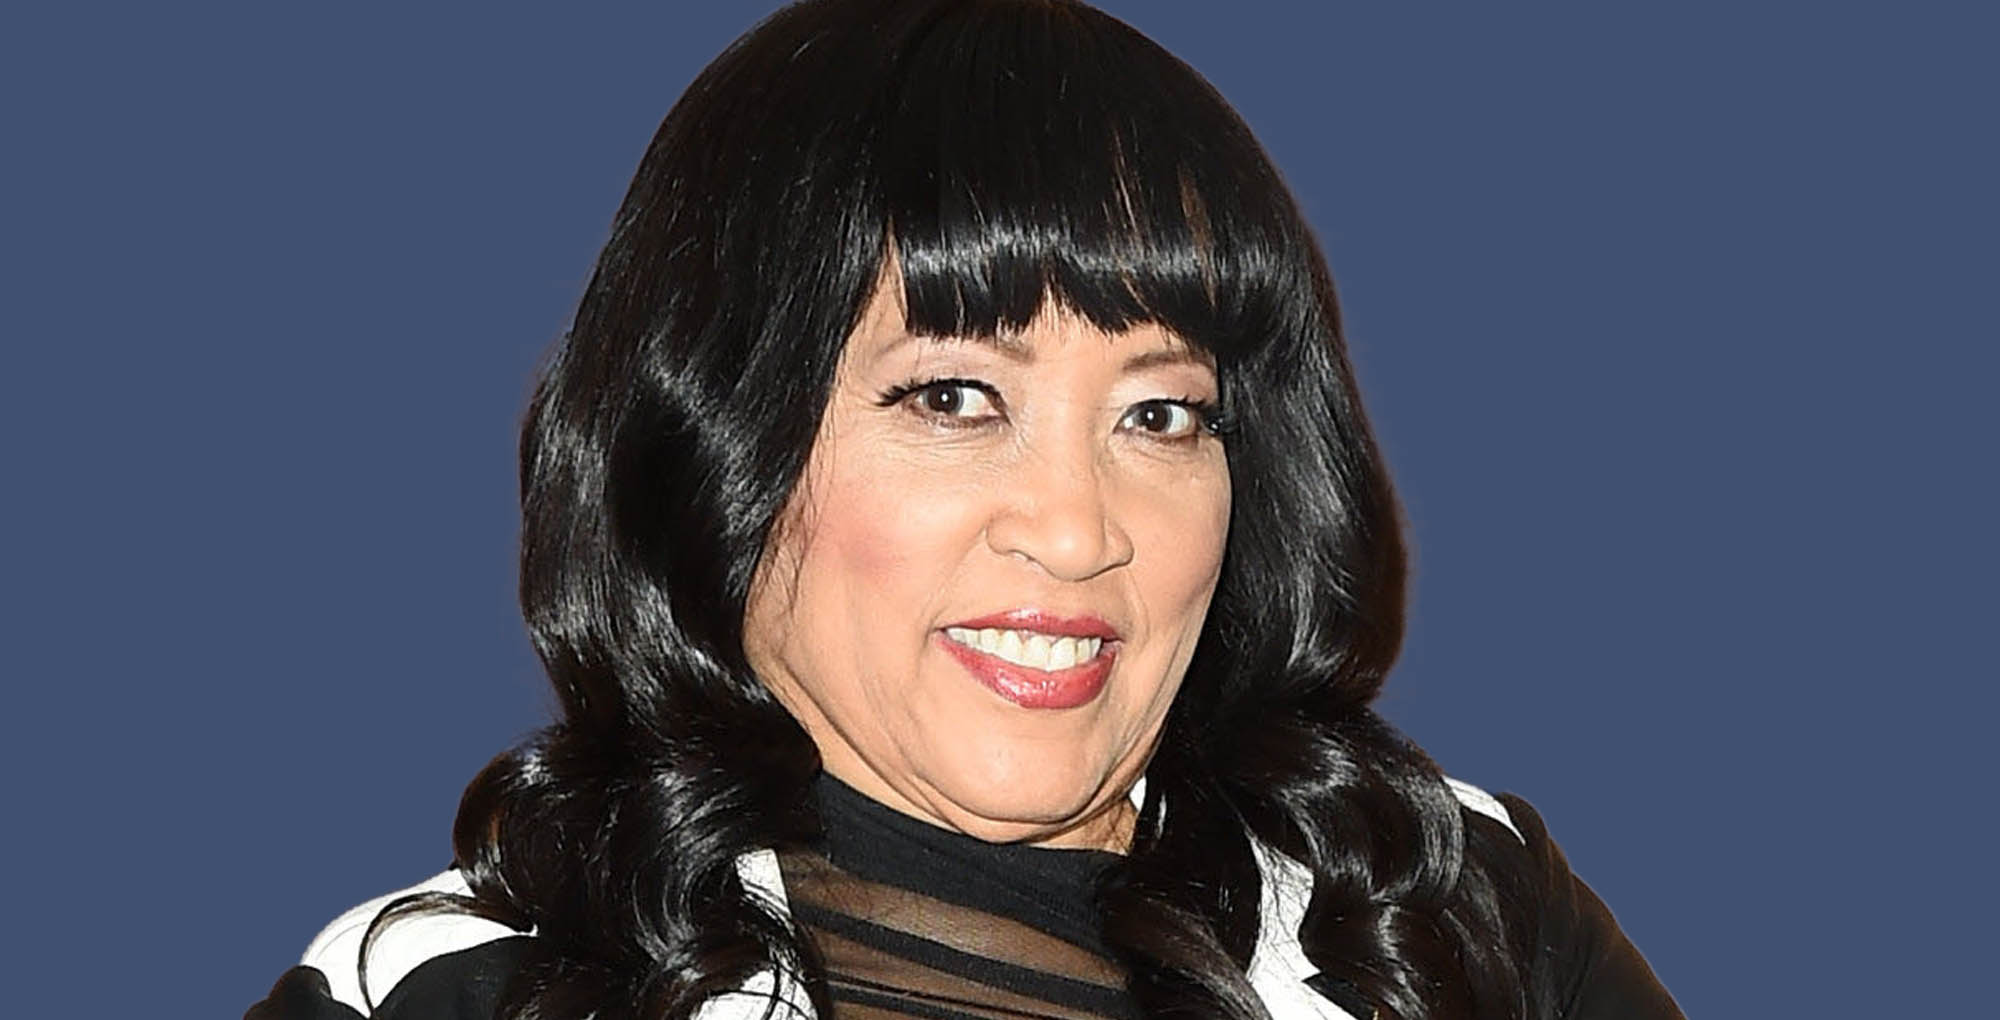 jackée harry from days of our lives celebrates her birthday.